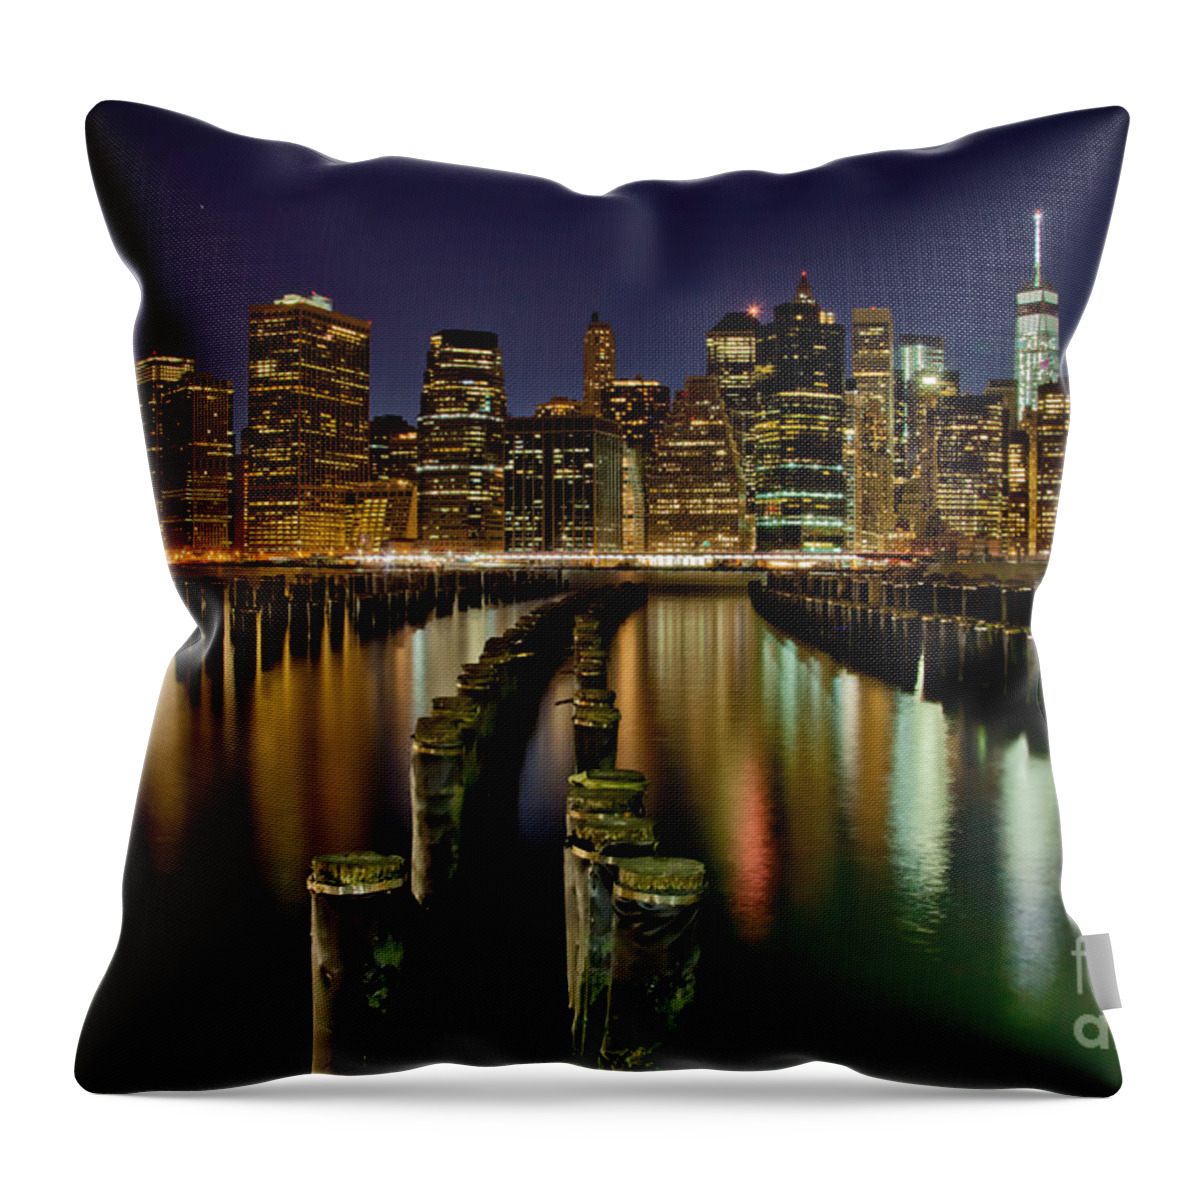 New York City Throw Pillow featuring the photograph Brooklyn Pier At Night by Az Jackson